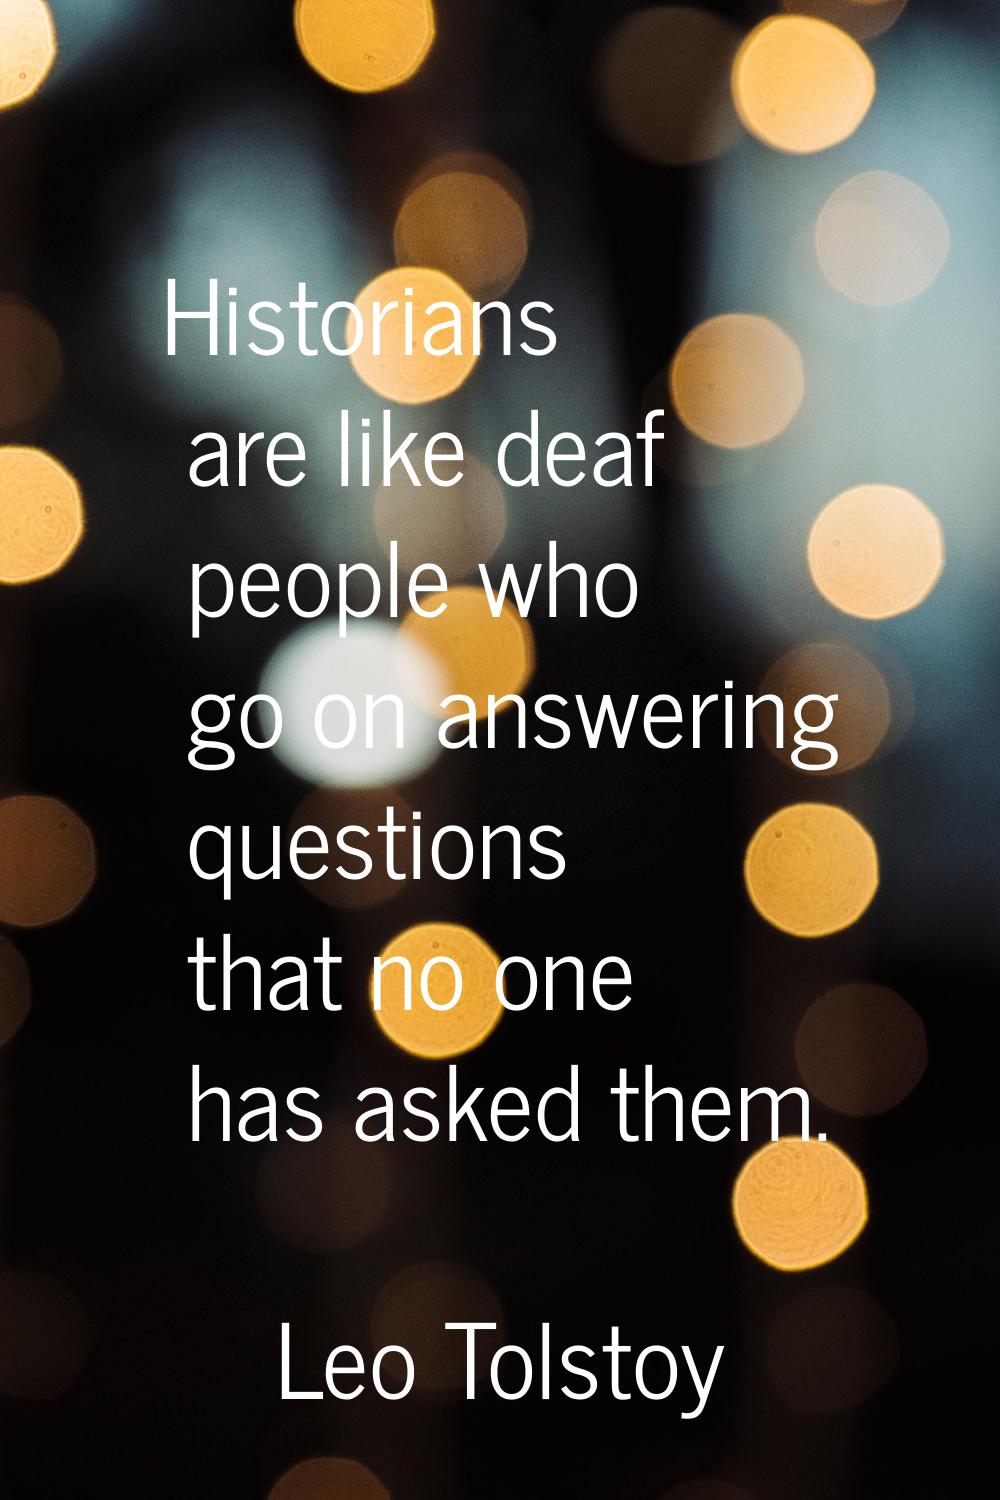 Historians are like deaf people who go on answering questions that no one has asked them.